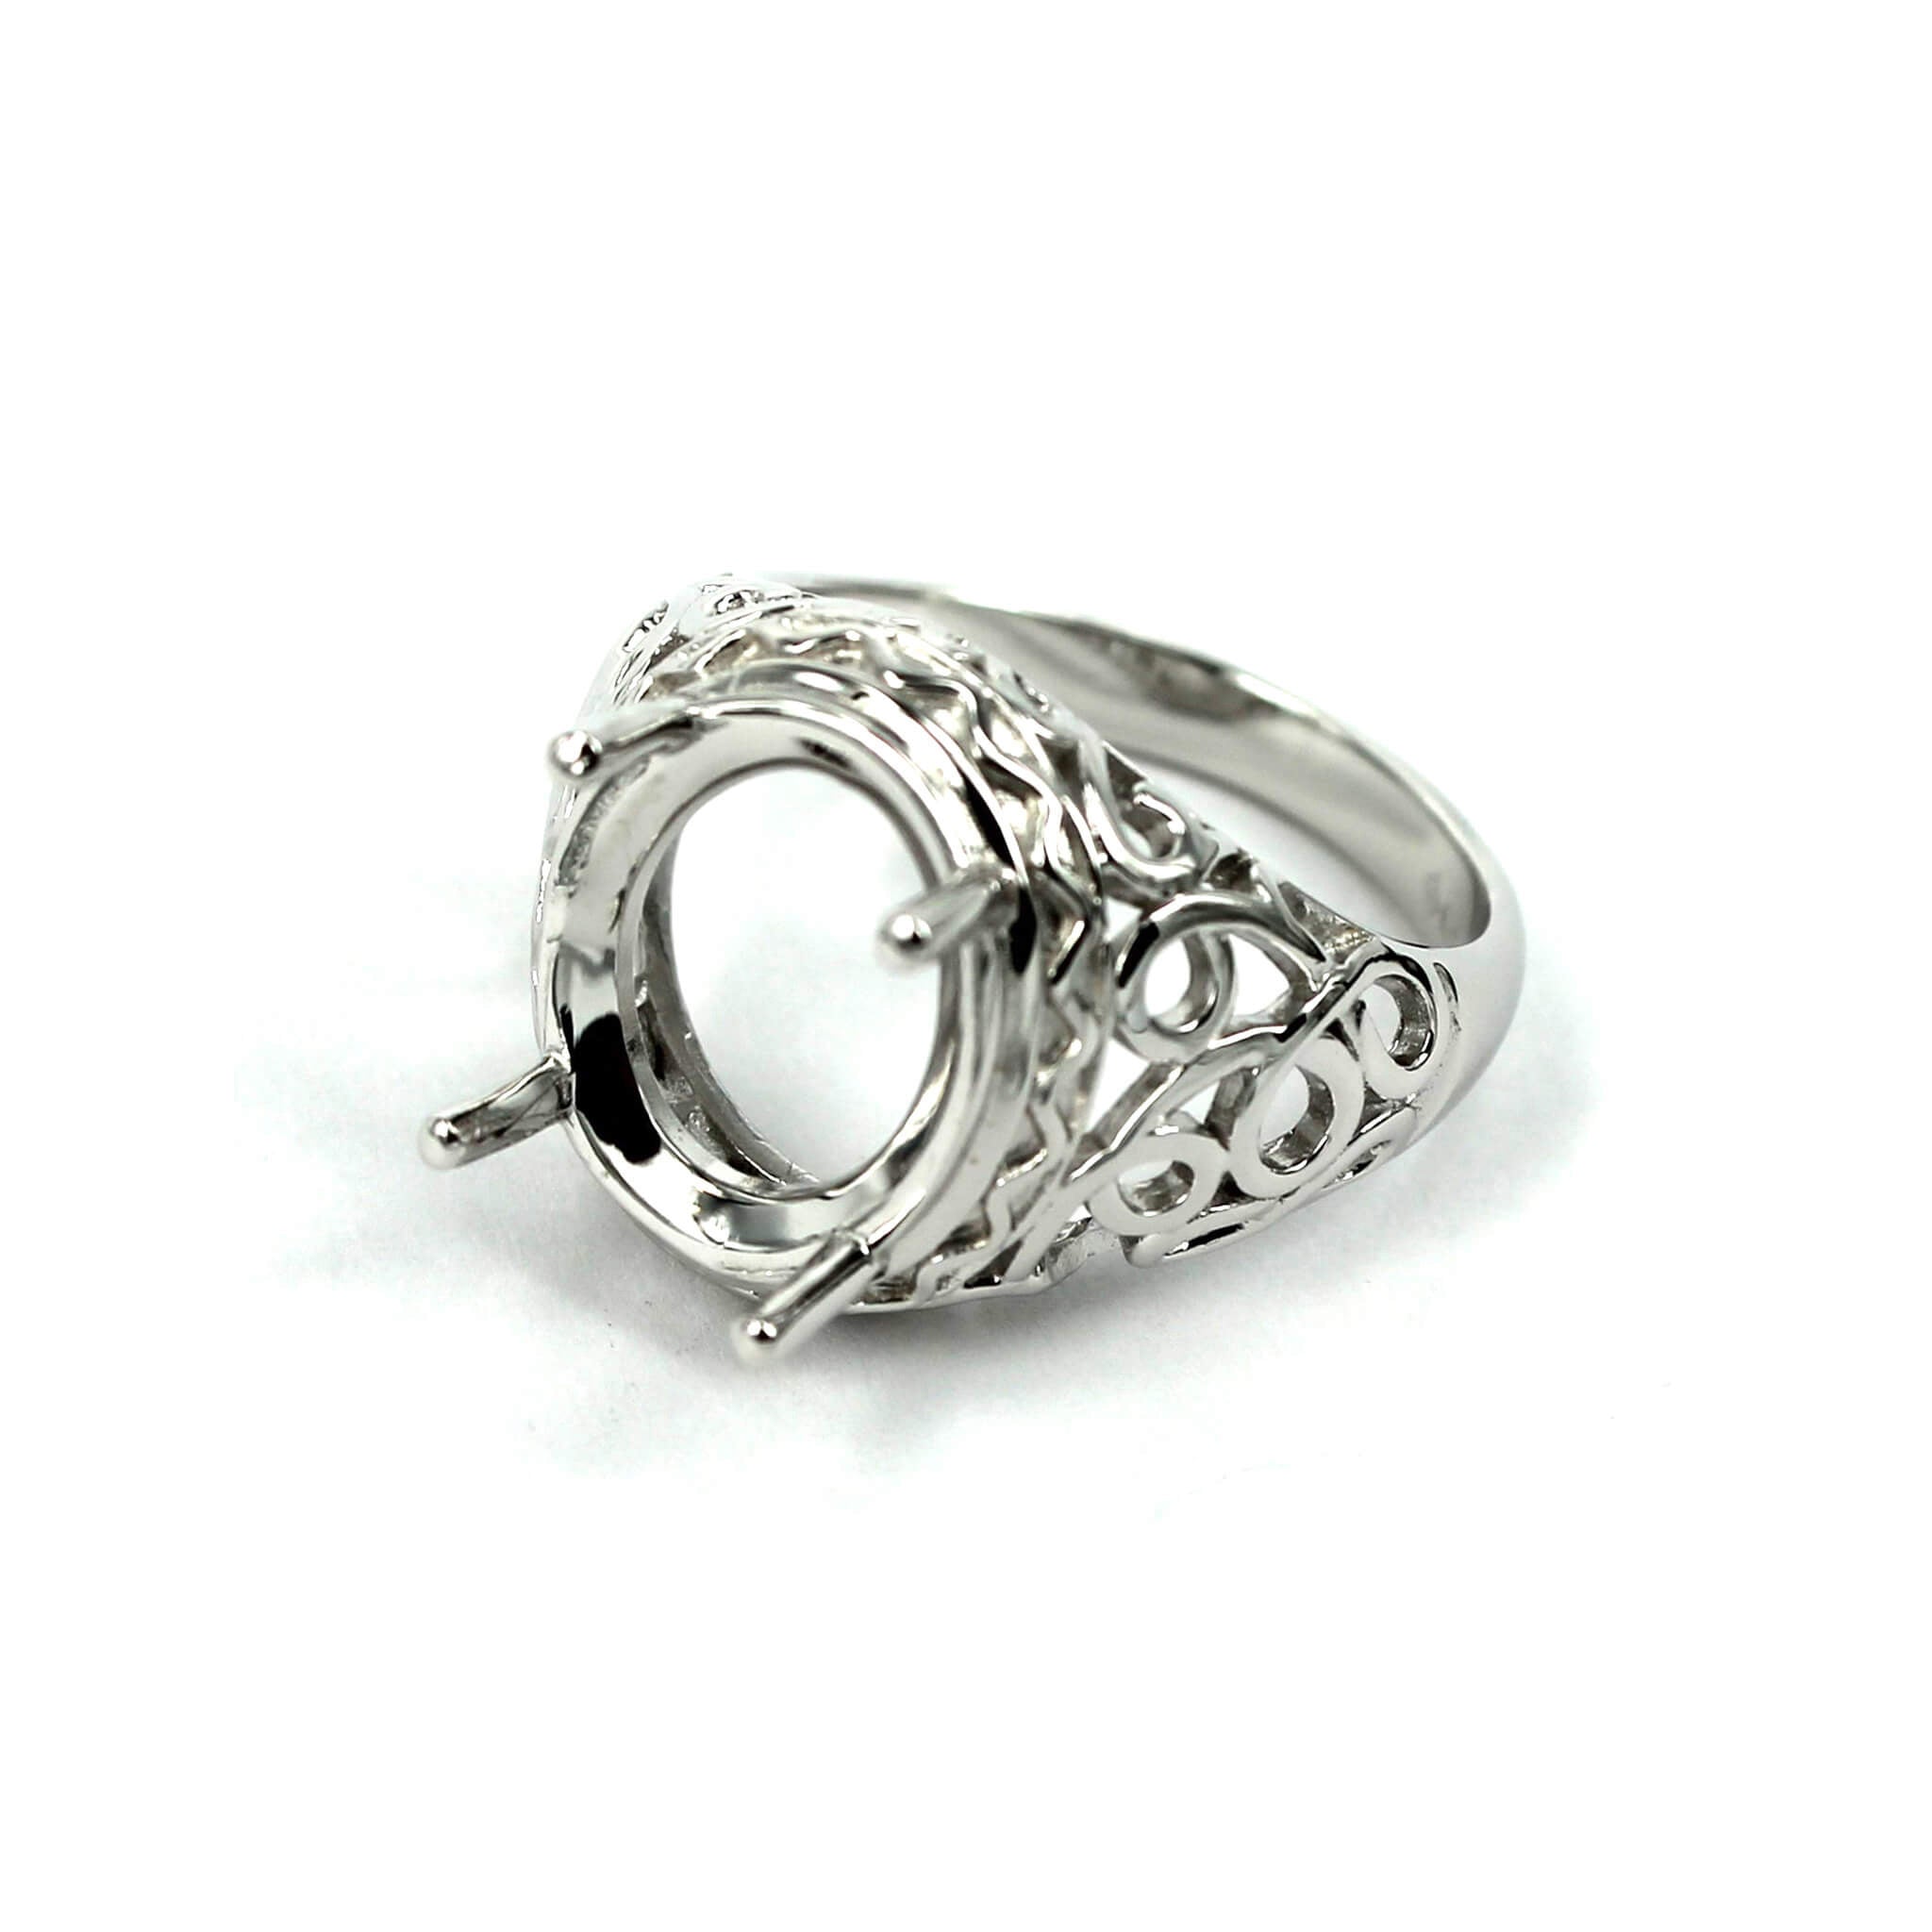 Hollow Swirls Ring with Oval Prongs Mounting in Sterling Silver 13x15mm